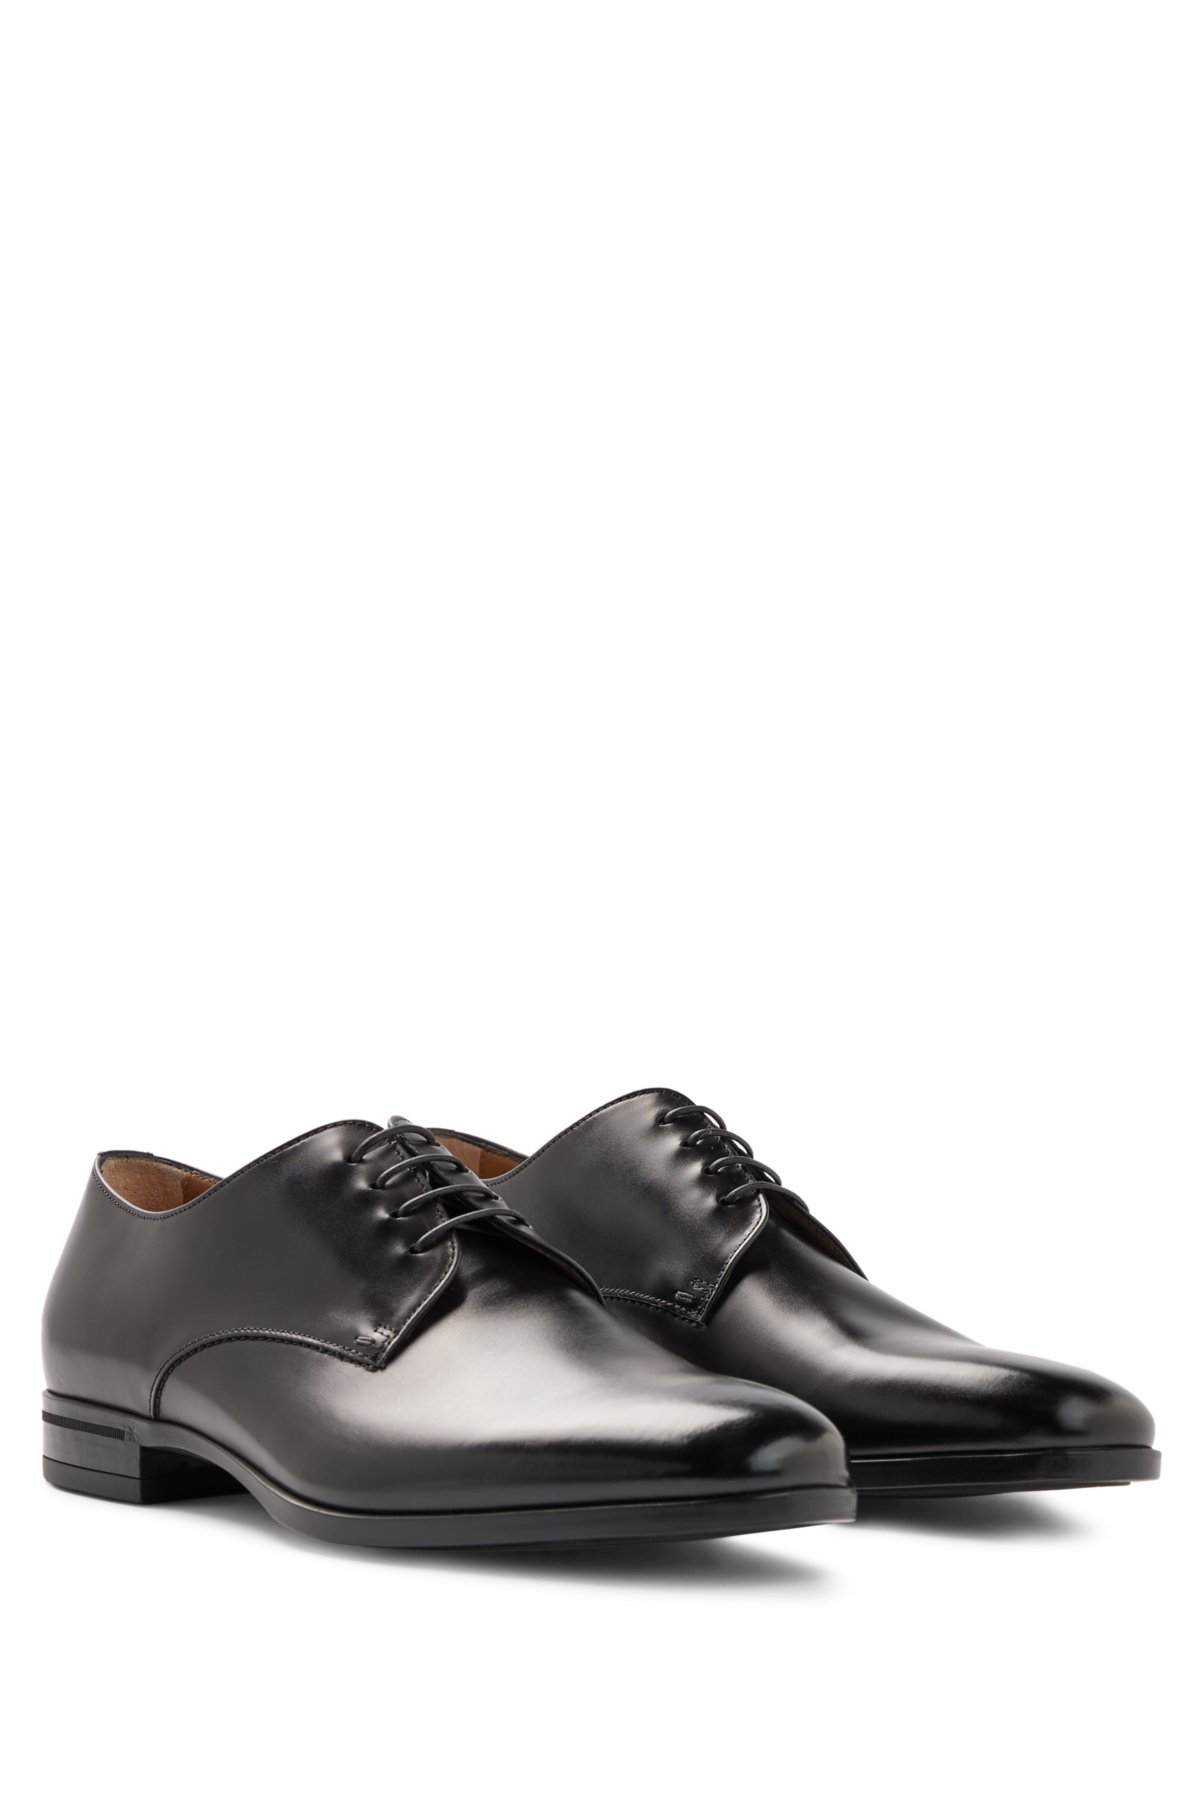 BOSS Derby shoes in vegetable-tanned leather